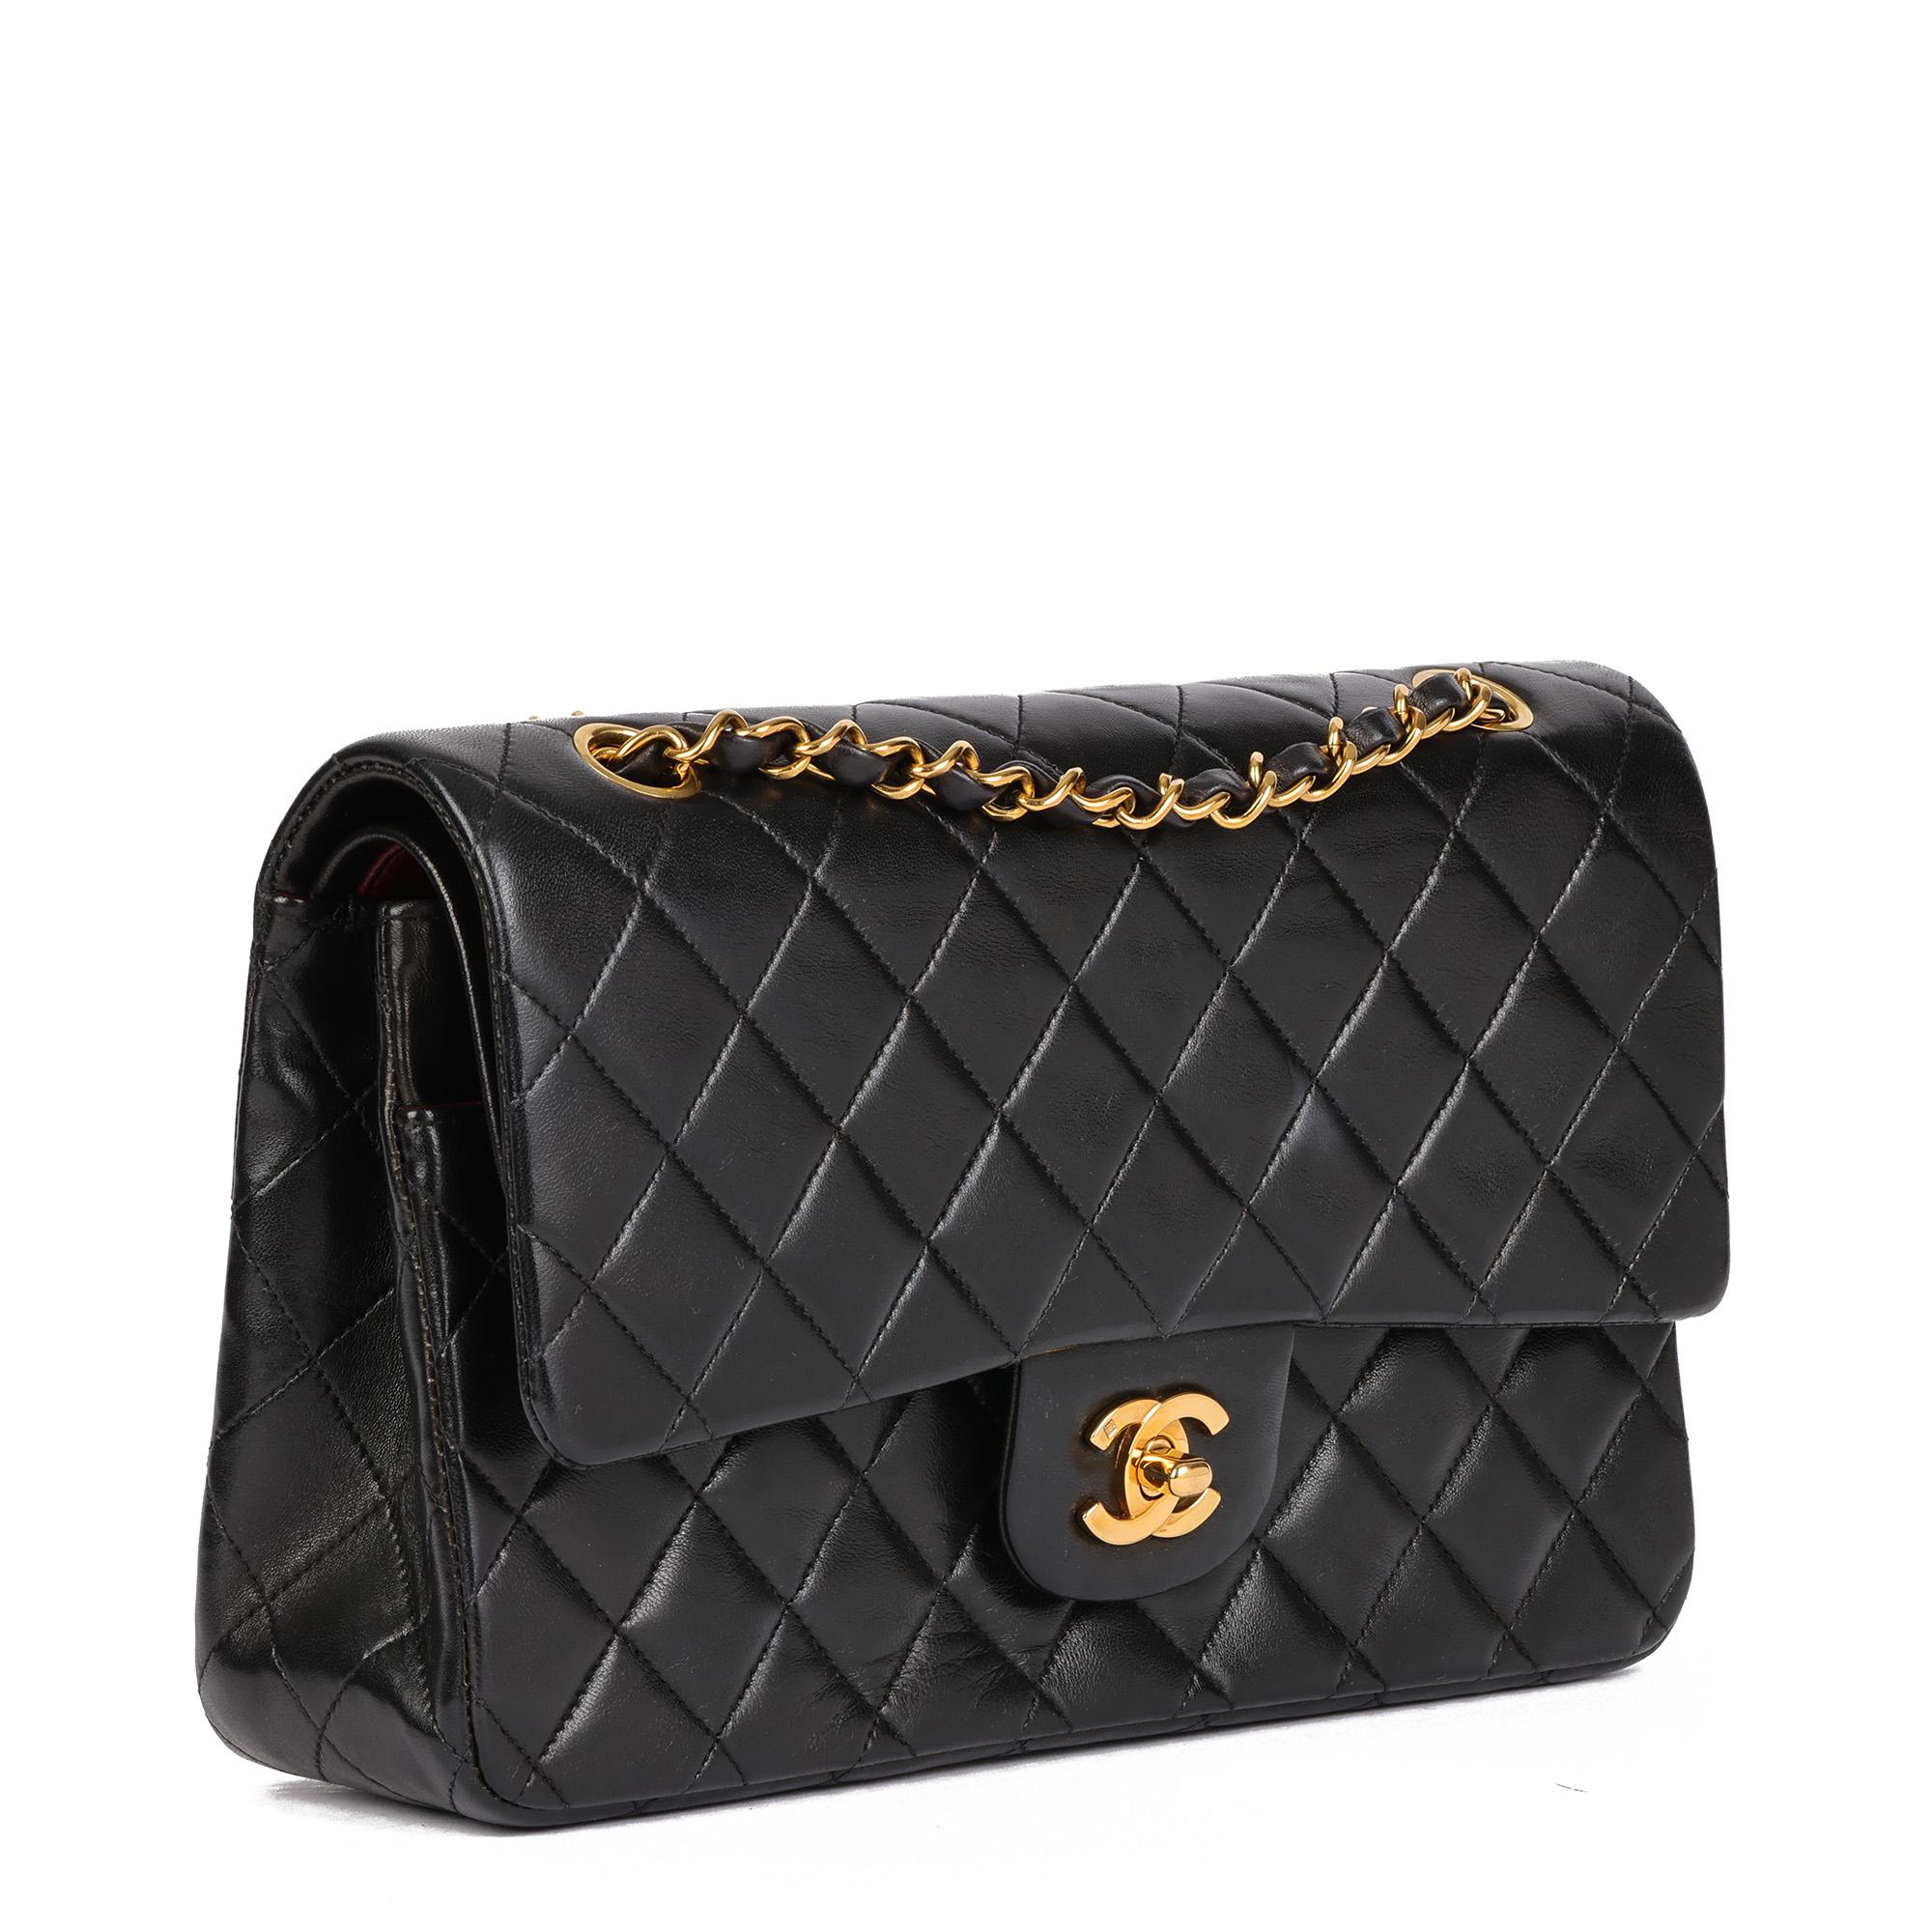 CHANEL
Black Quilted Lambskin Vintage Medium Classic Double Flap Bag 

Serial Number: 2864799
Age (Circa): 1993
Accompanied By: Chanel Dust Bag
Authenticity Details: Serial Sticker (Made in France)
Gender: Ladies
Type: Shoulder

Colour: